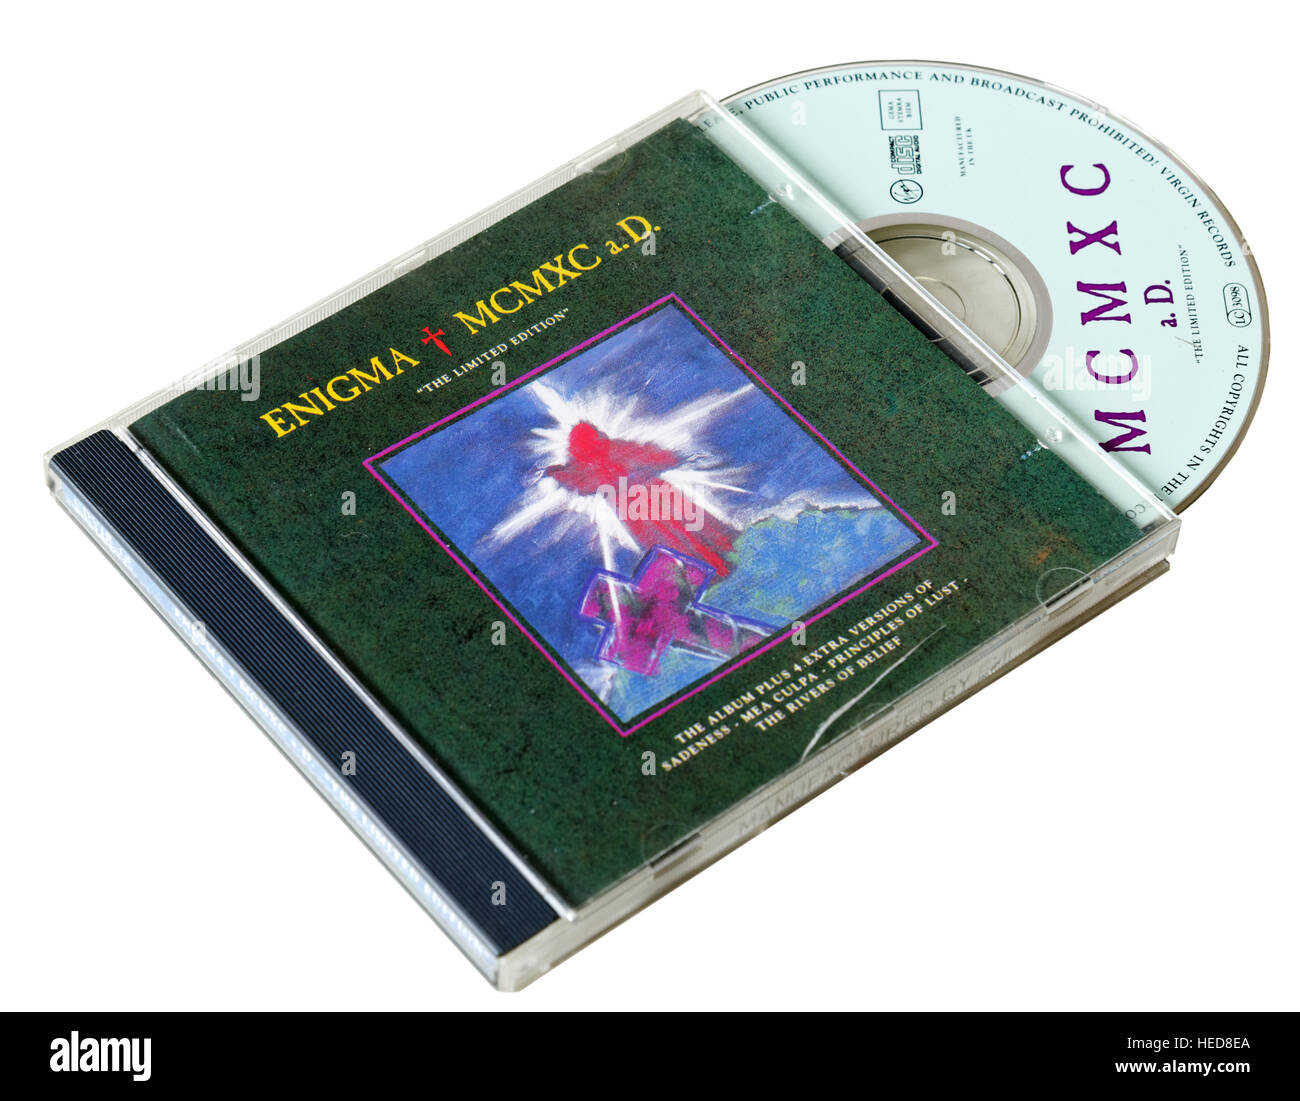 Enigma MCMXC a.D CD Stock Photo